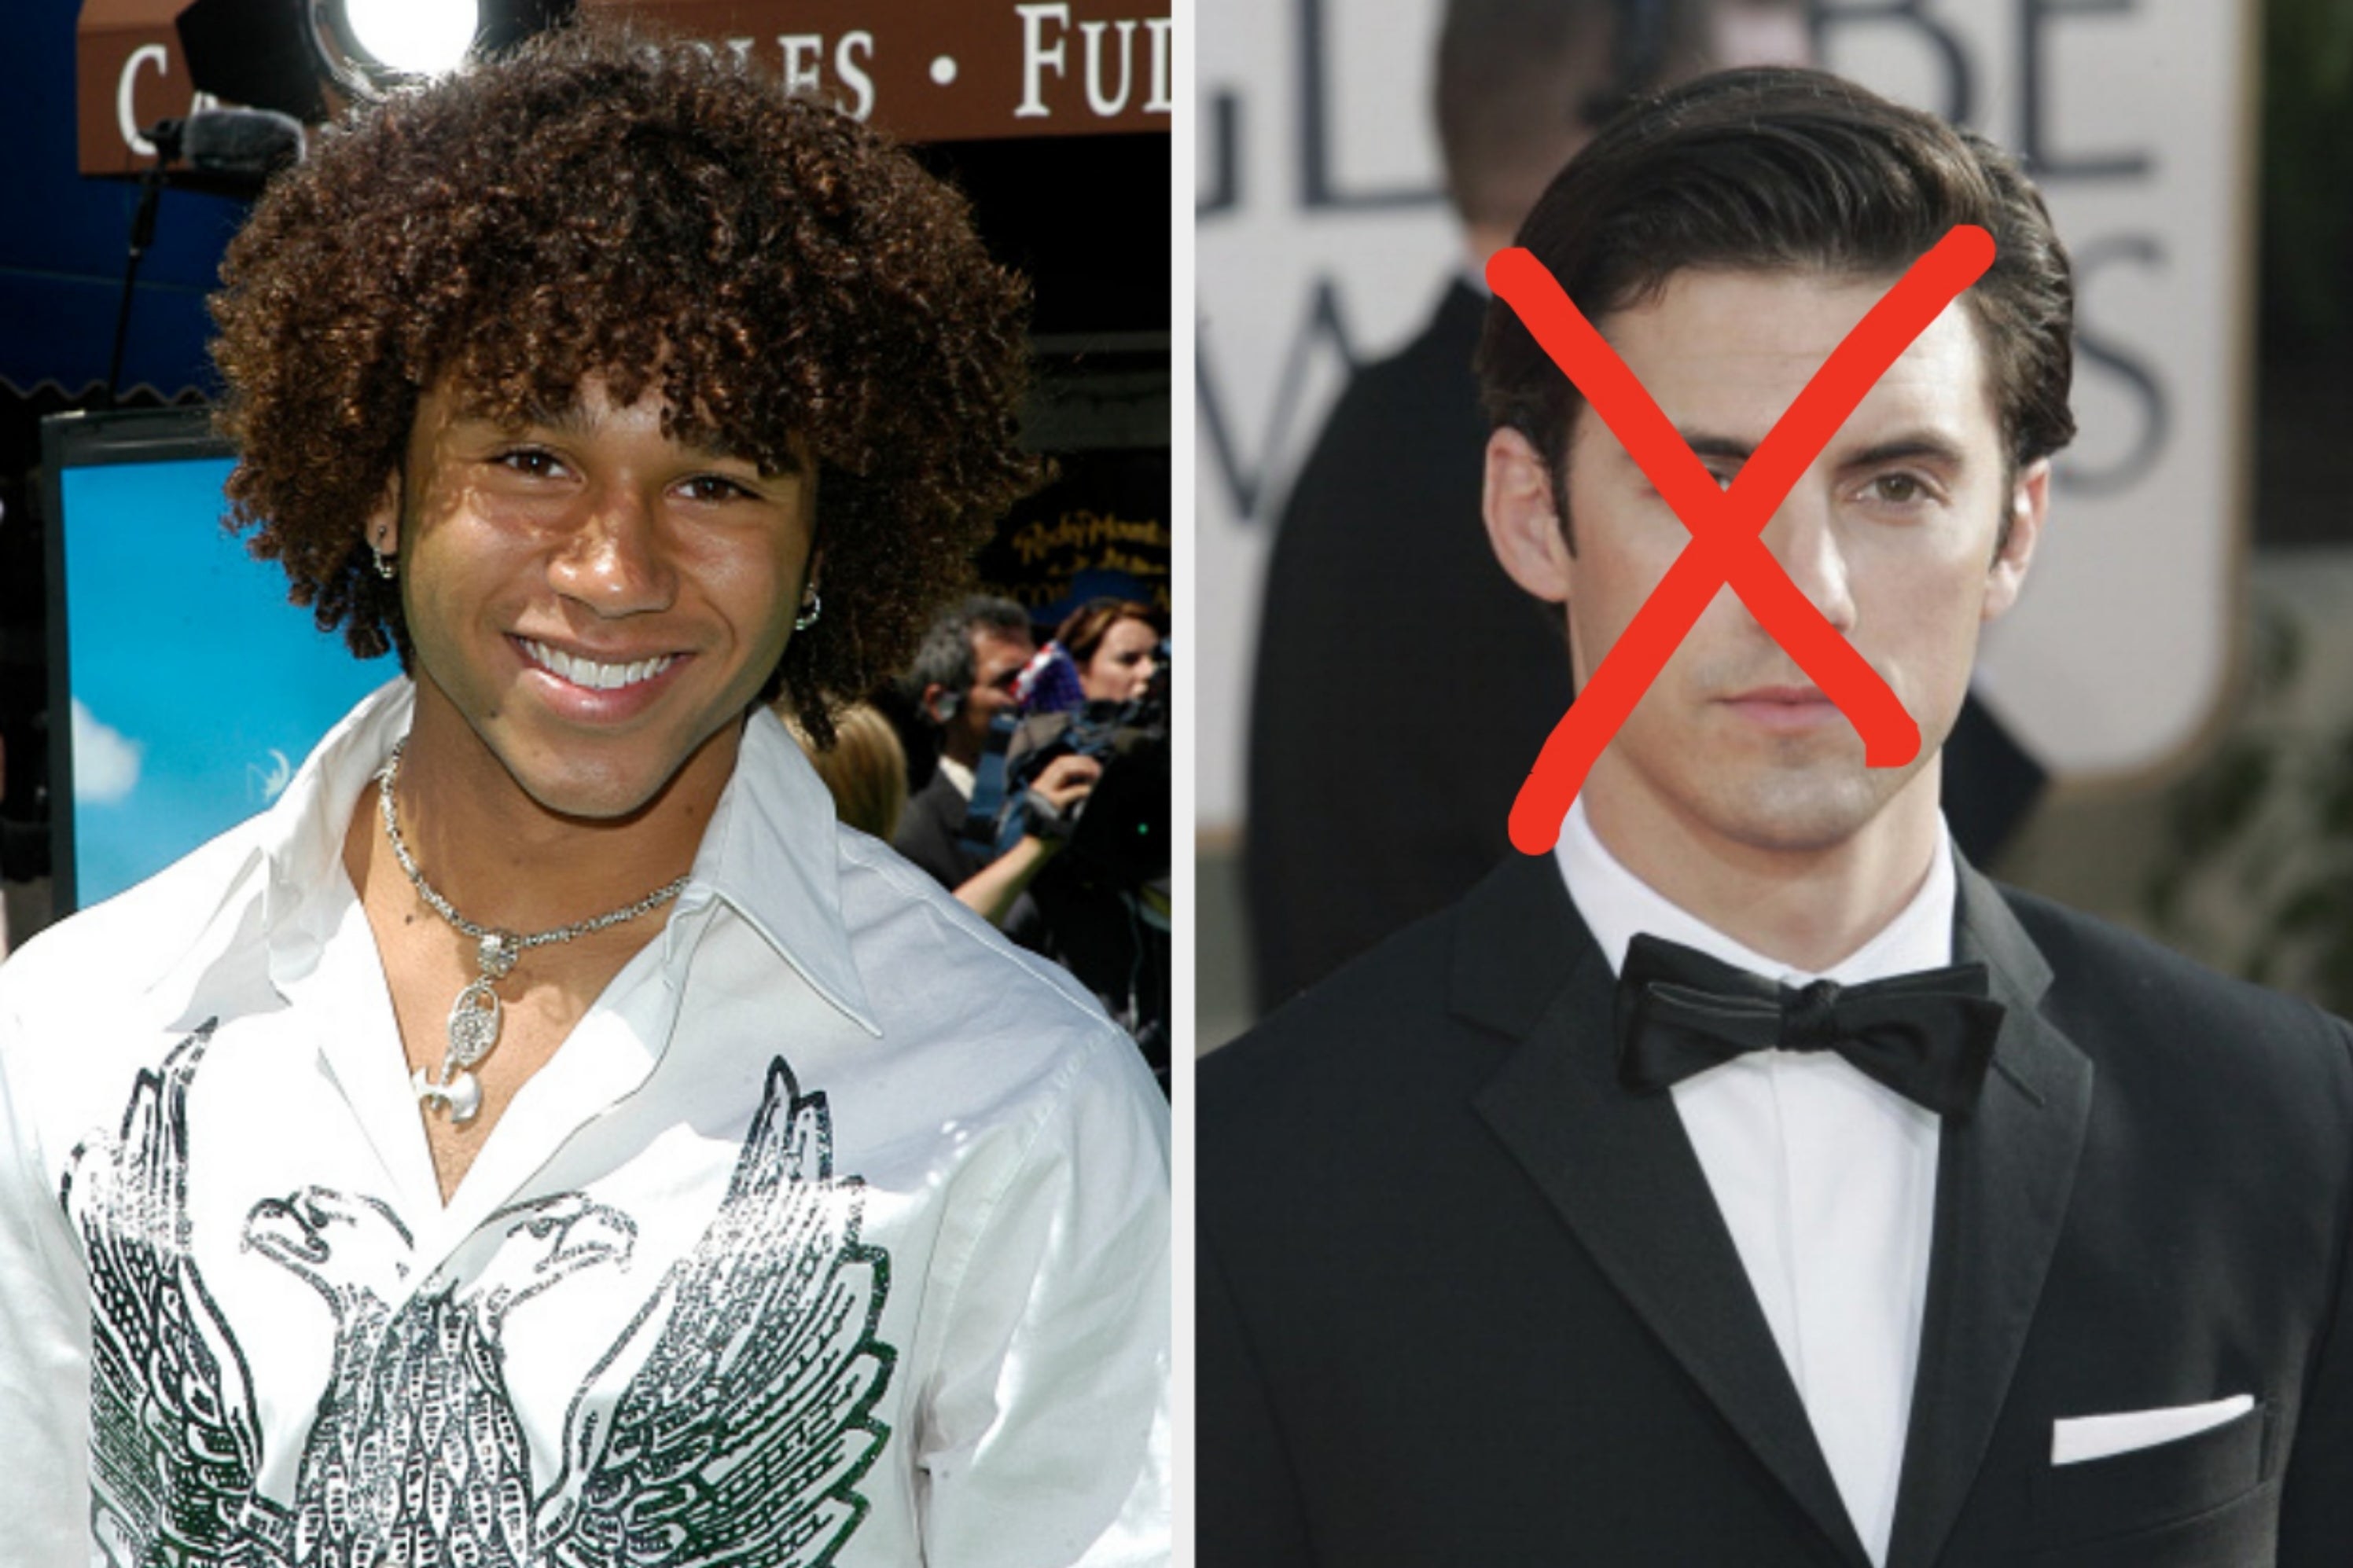 two images; on the left, Corbin Bleu from the late 2000s and on the right, Milo Ventimiglia from the 2000s with an X over his face